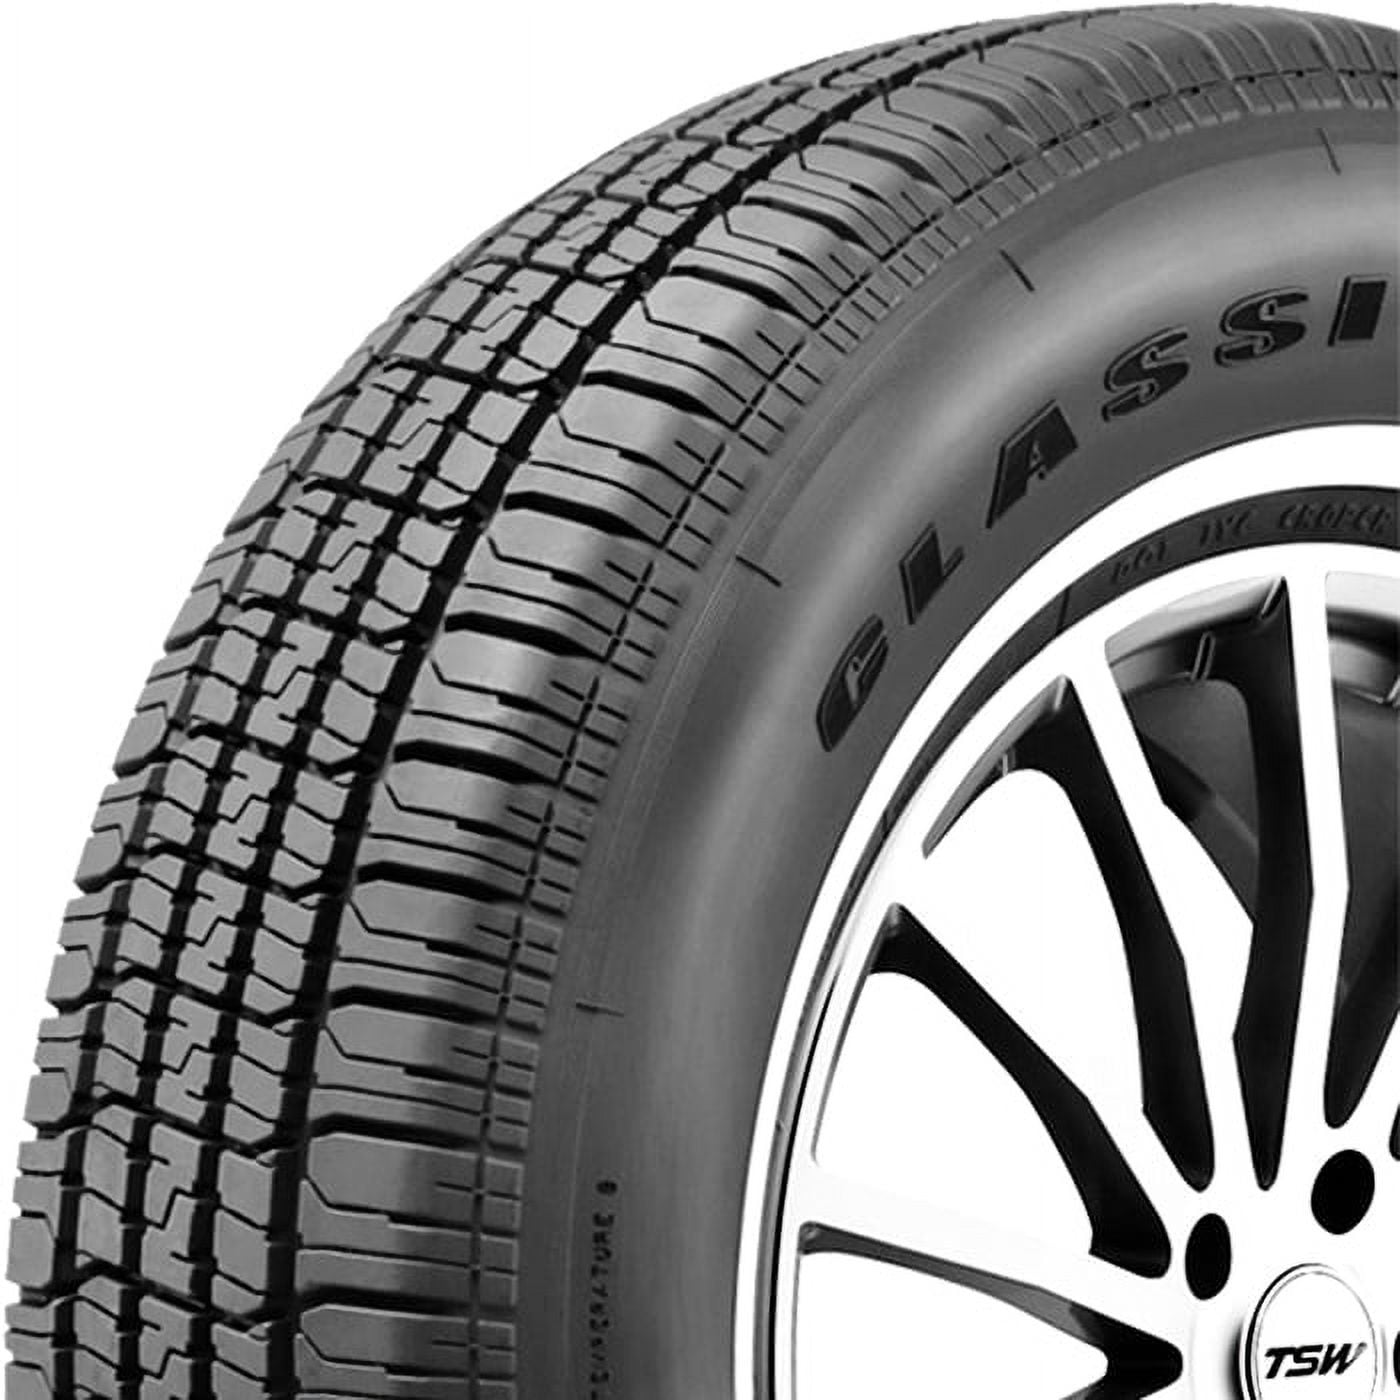 Vercelli Set Tires Escape A/S 787 Sahara 225/70R15 Season 2005 Fits: Ford Classic 4 (FOUR) of Jeep Wrangler 2000 XLT, All AS 100S